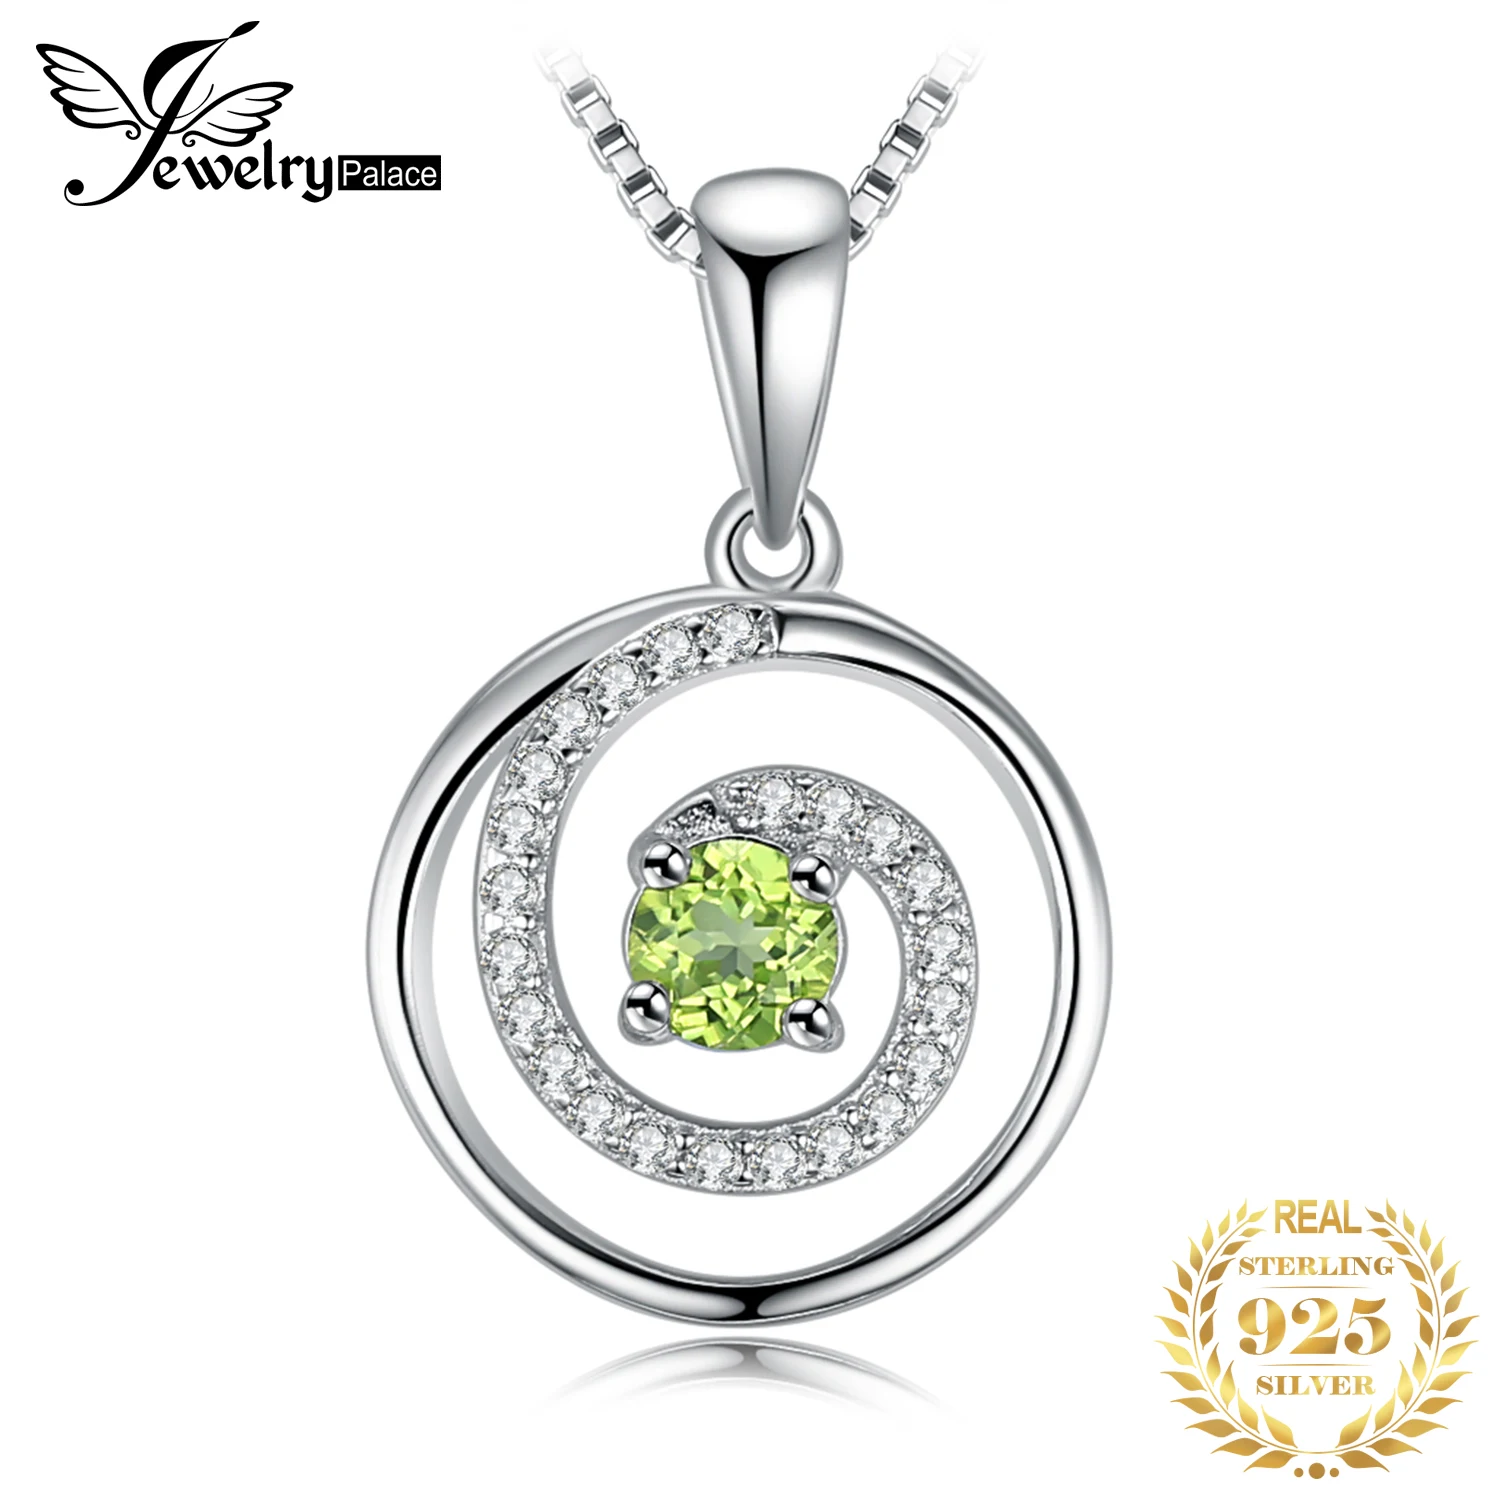 

JewelryPalace Circle Round Natural Peridot 925 Sterling Silver Pendant Necklace for Women Fashion Gemstone Choker Without Chain